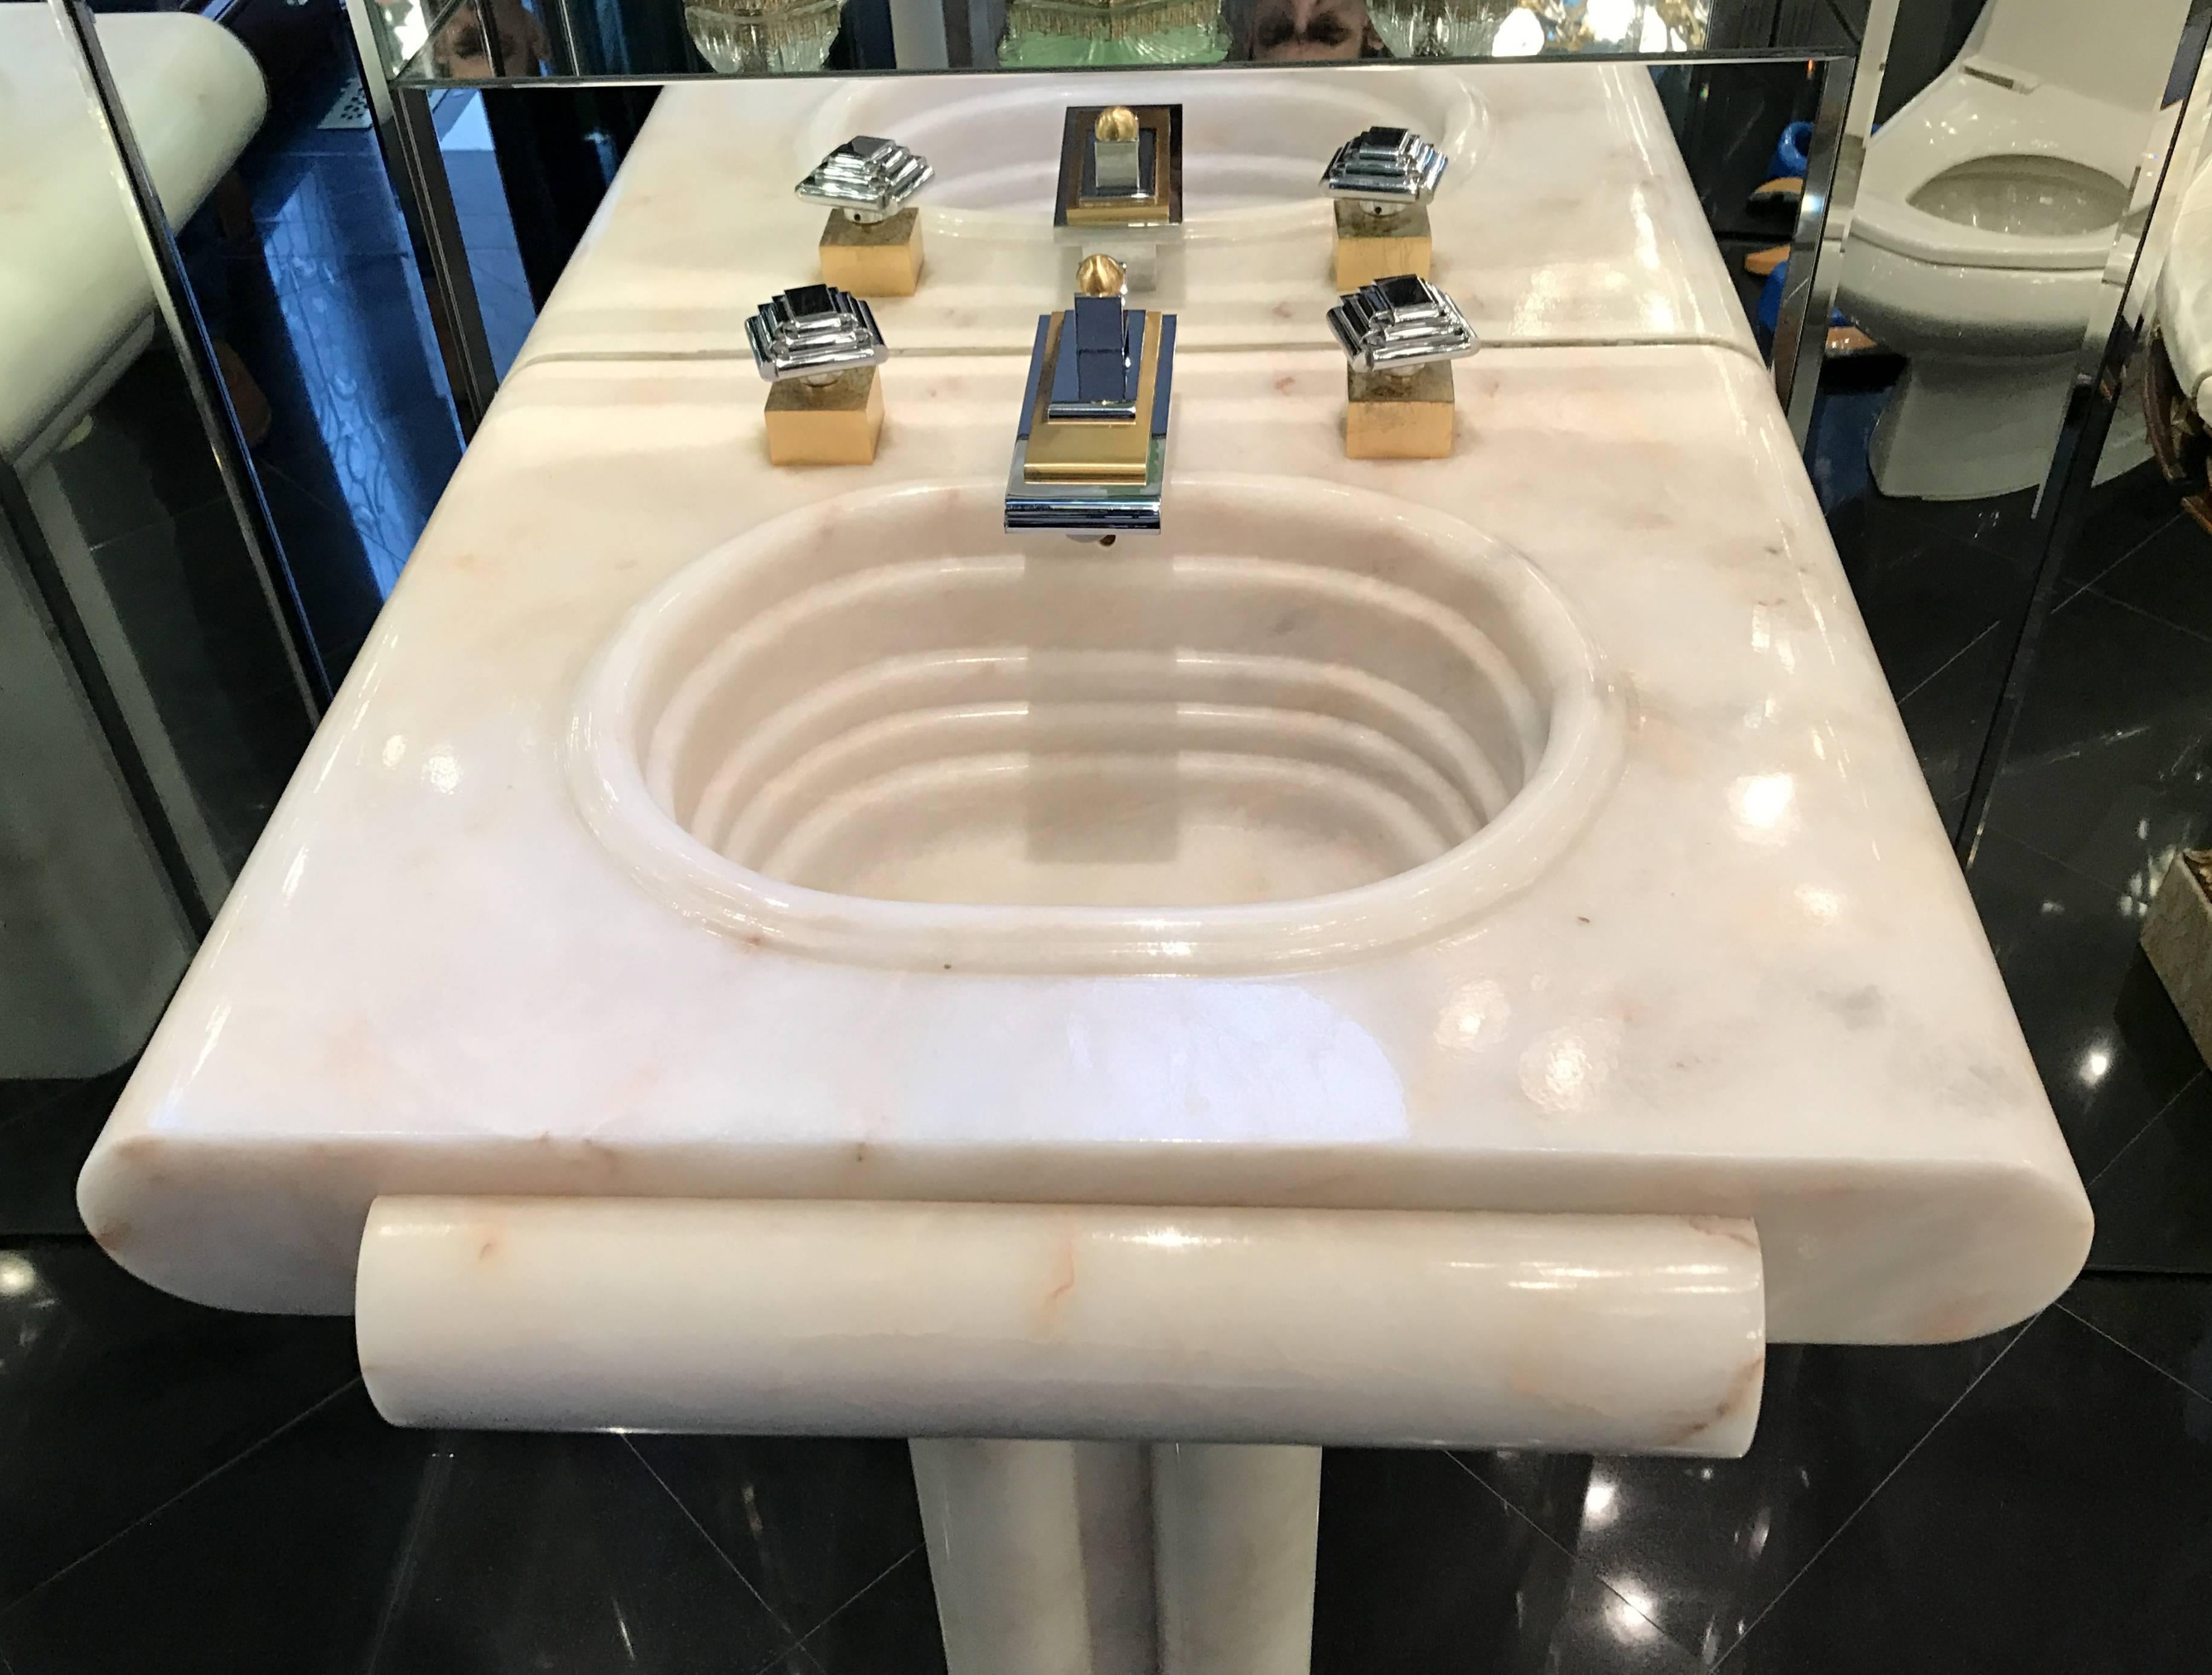 A wonderful vintage Sherle Wagner vanity sink in nickel and brass carved from a single block of onyx (Rosa Du Monte - RSDM) in the Art Deco, Nouveau design. This sink is still being offered from Sherle Wagner for over $30,000. Everything is in